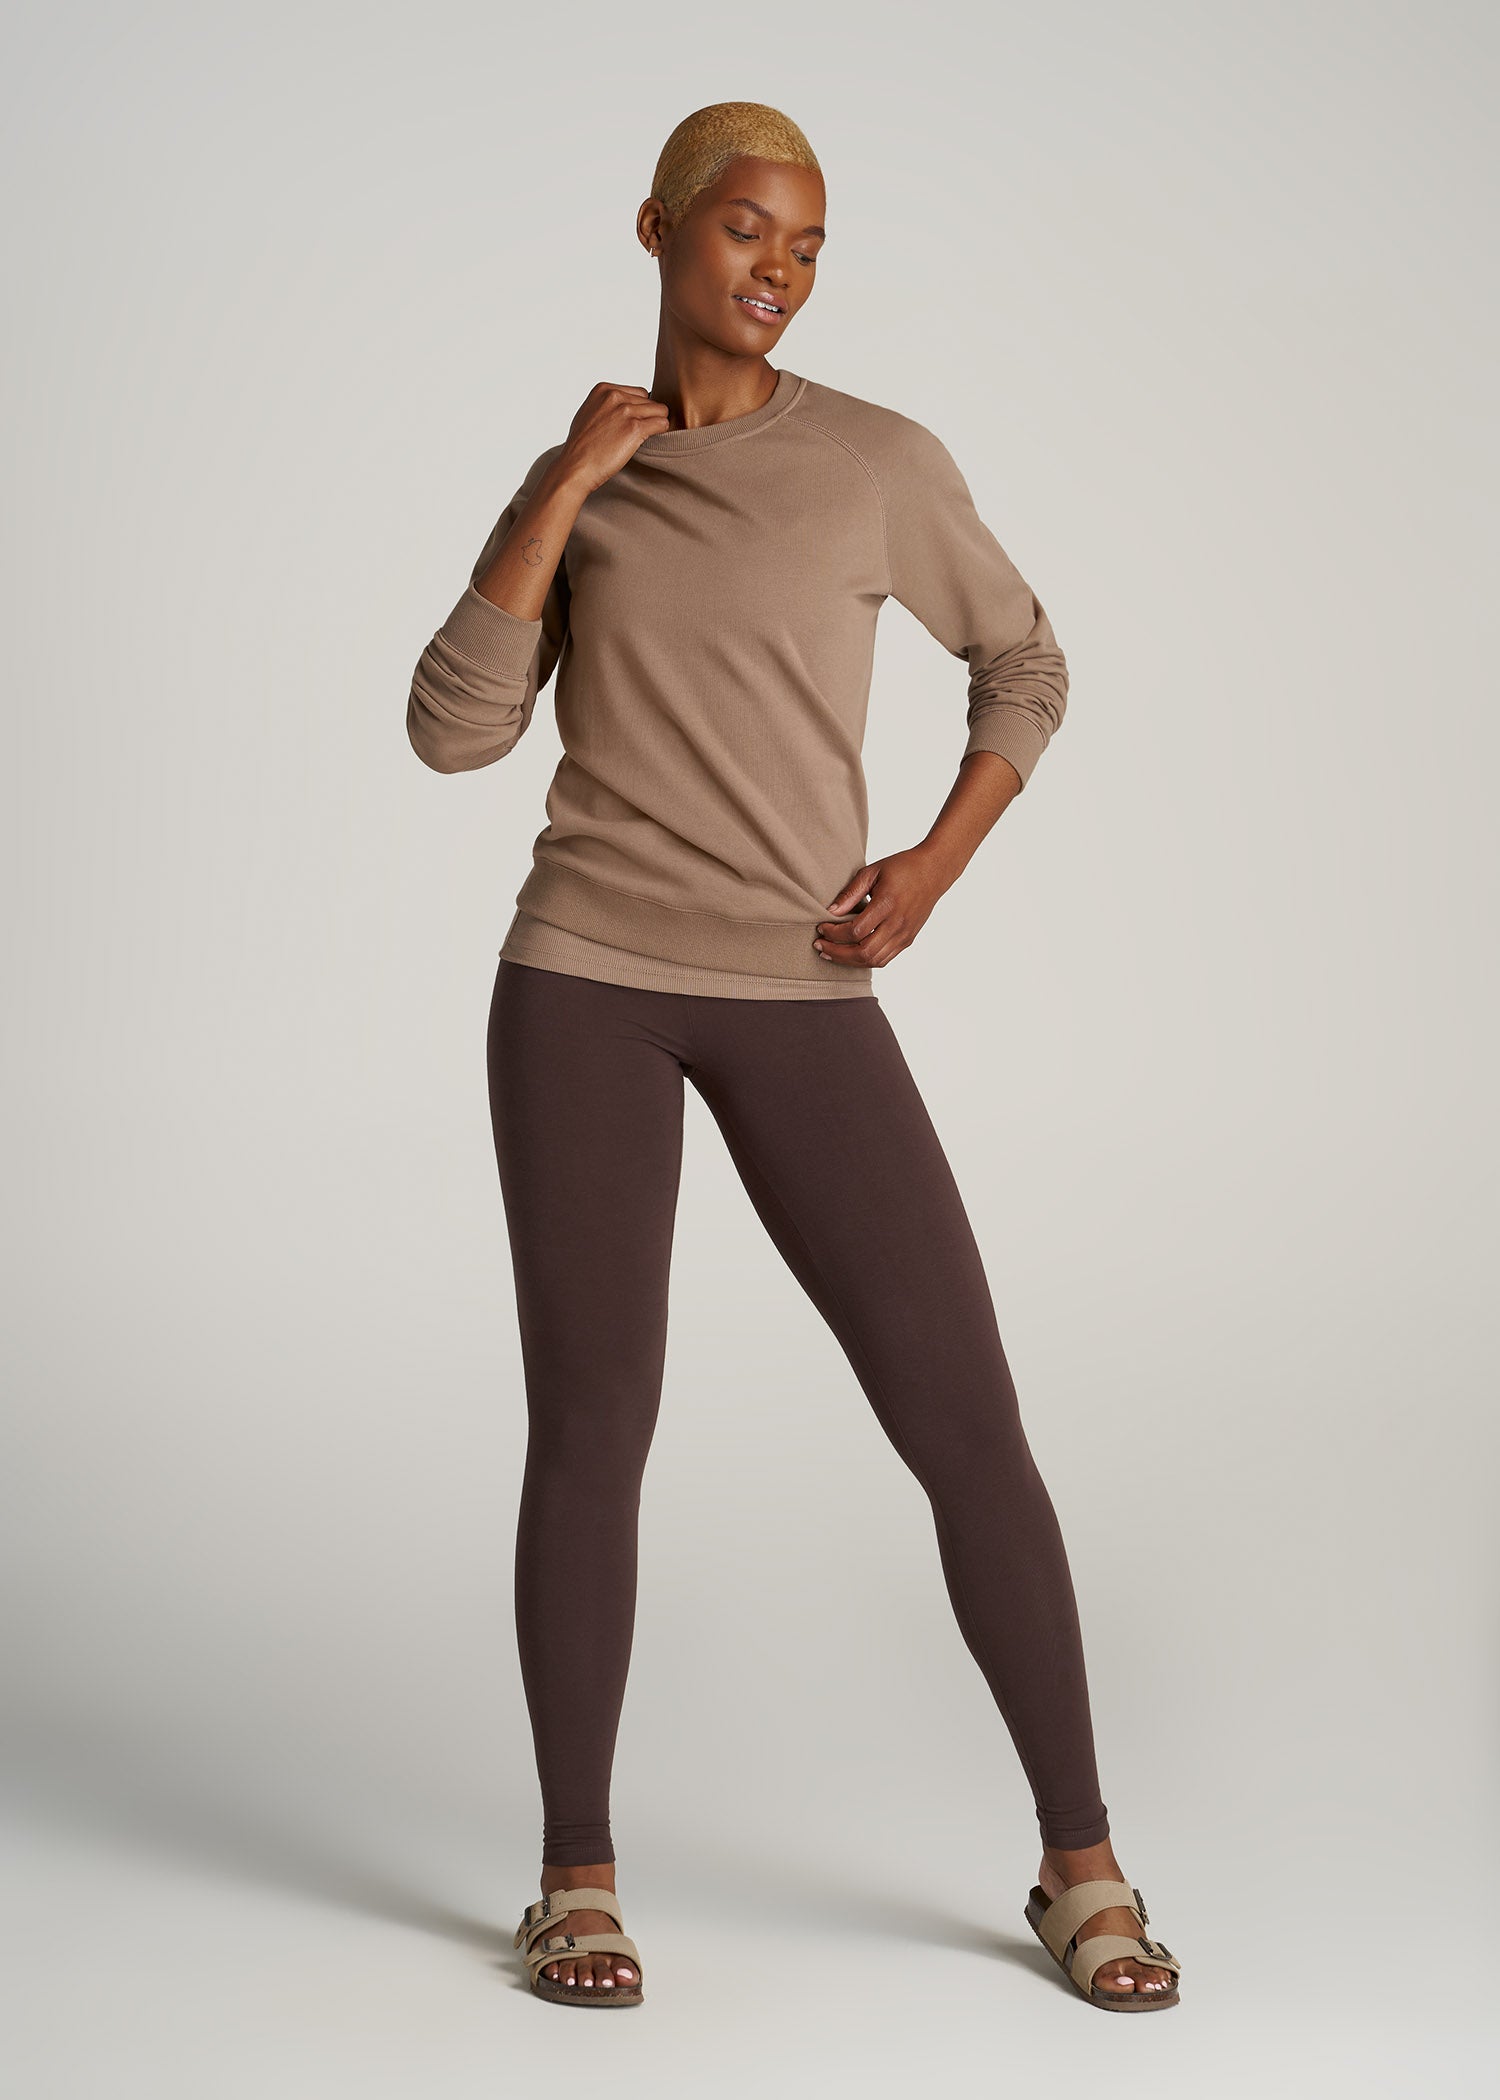 Brown Tights Womens